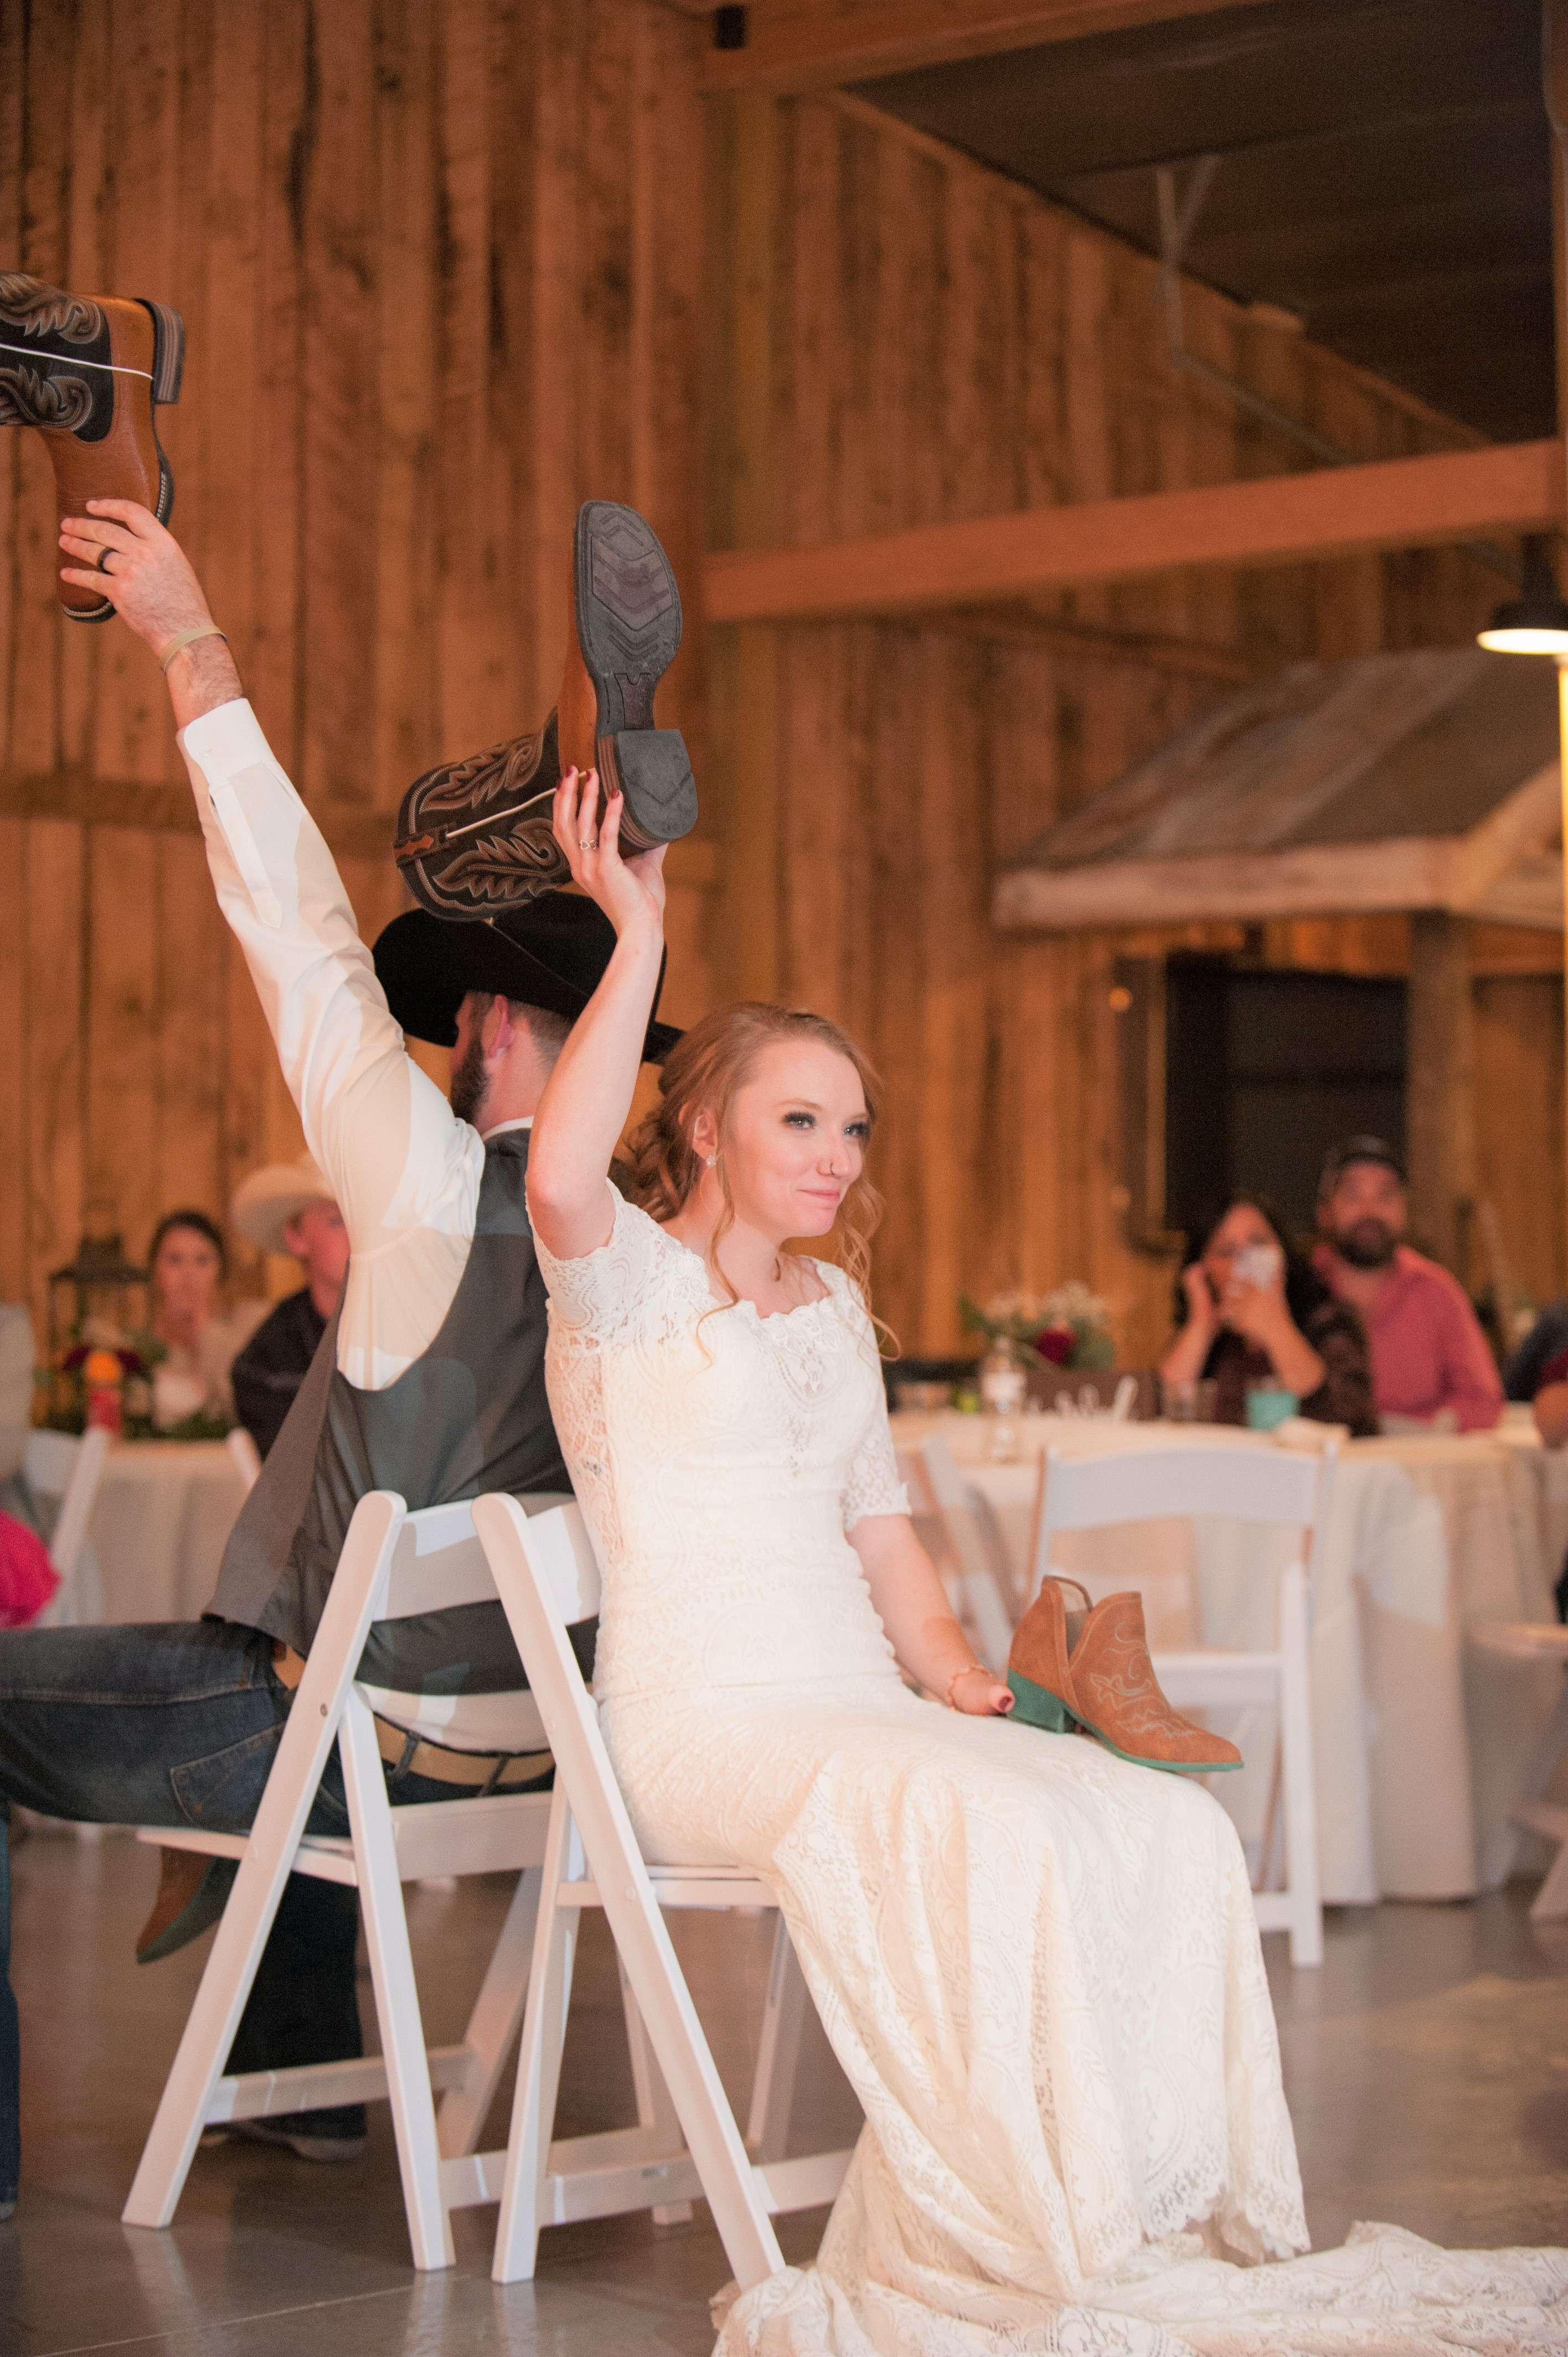 Bride and groom playing the shoe game at wedding reception near Springfield, Missouri.